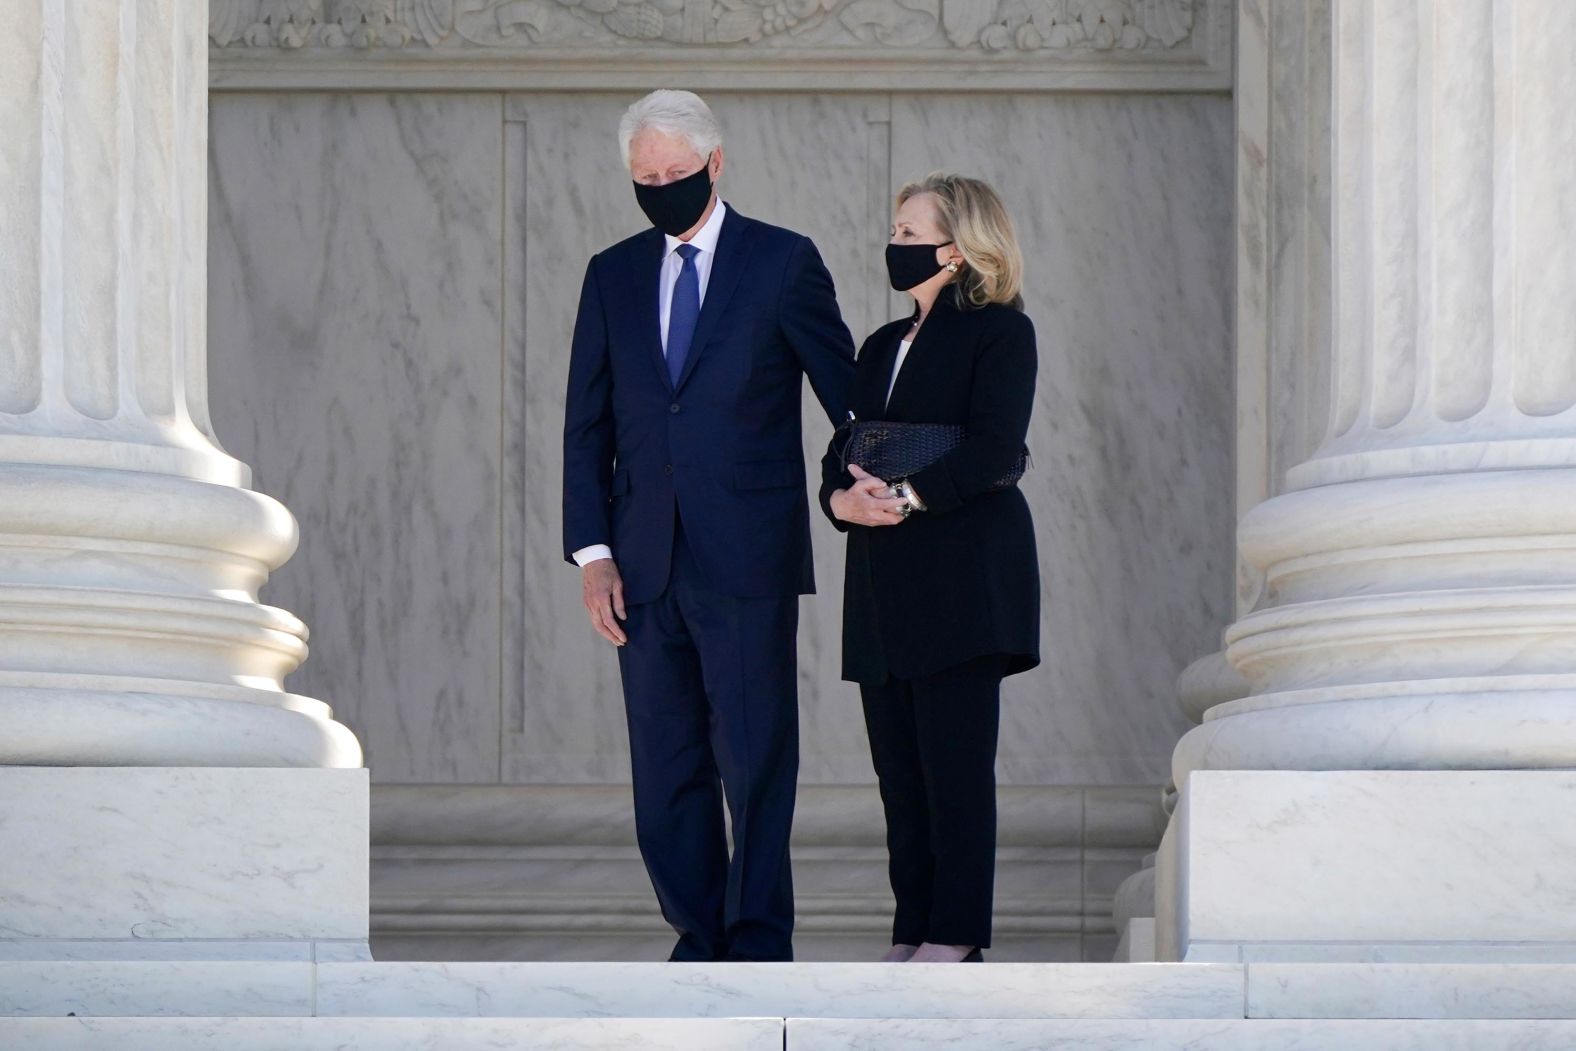 Former President Bill Clinton and former Secretary of State Hillary Clinton pay their respects. Ginsburg was appointed to the Supreme Court by President Clinton in 1993.